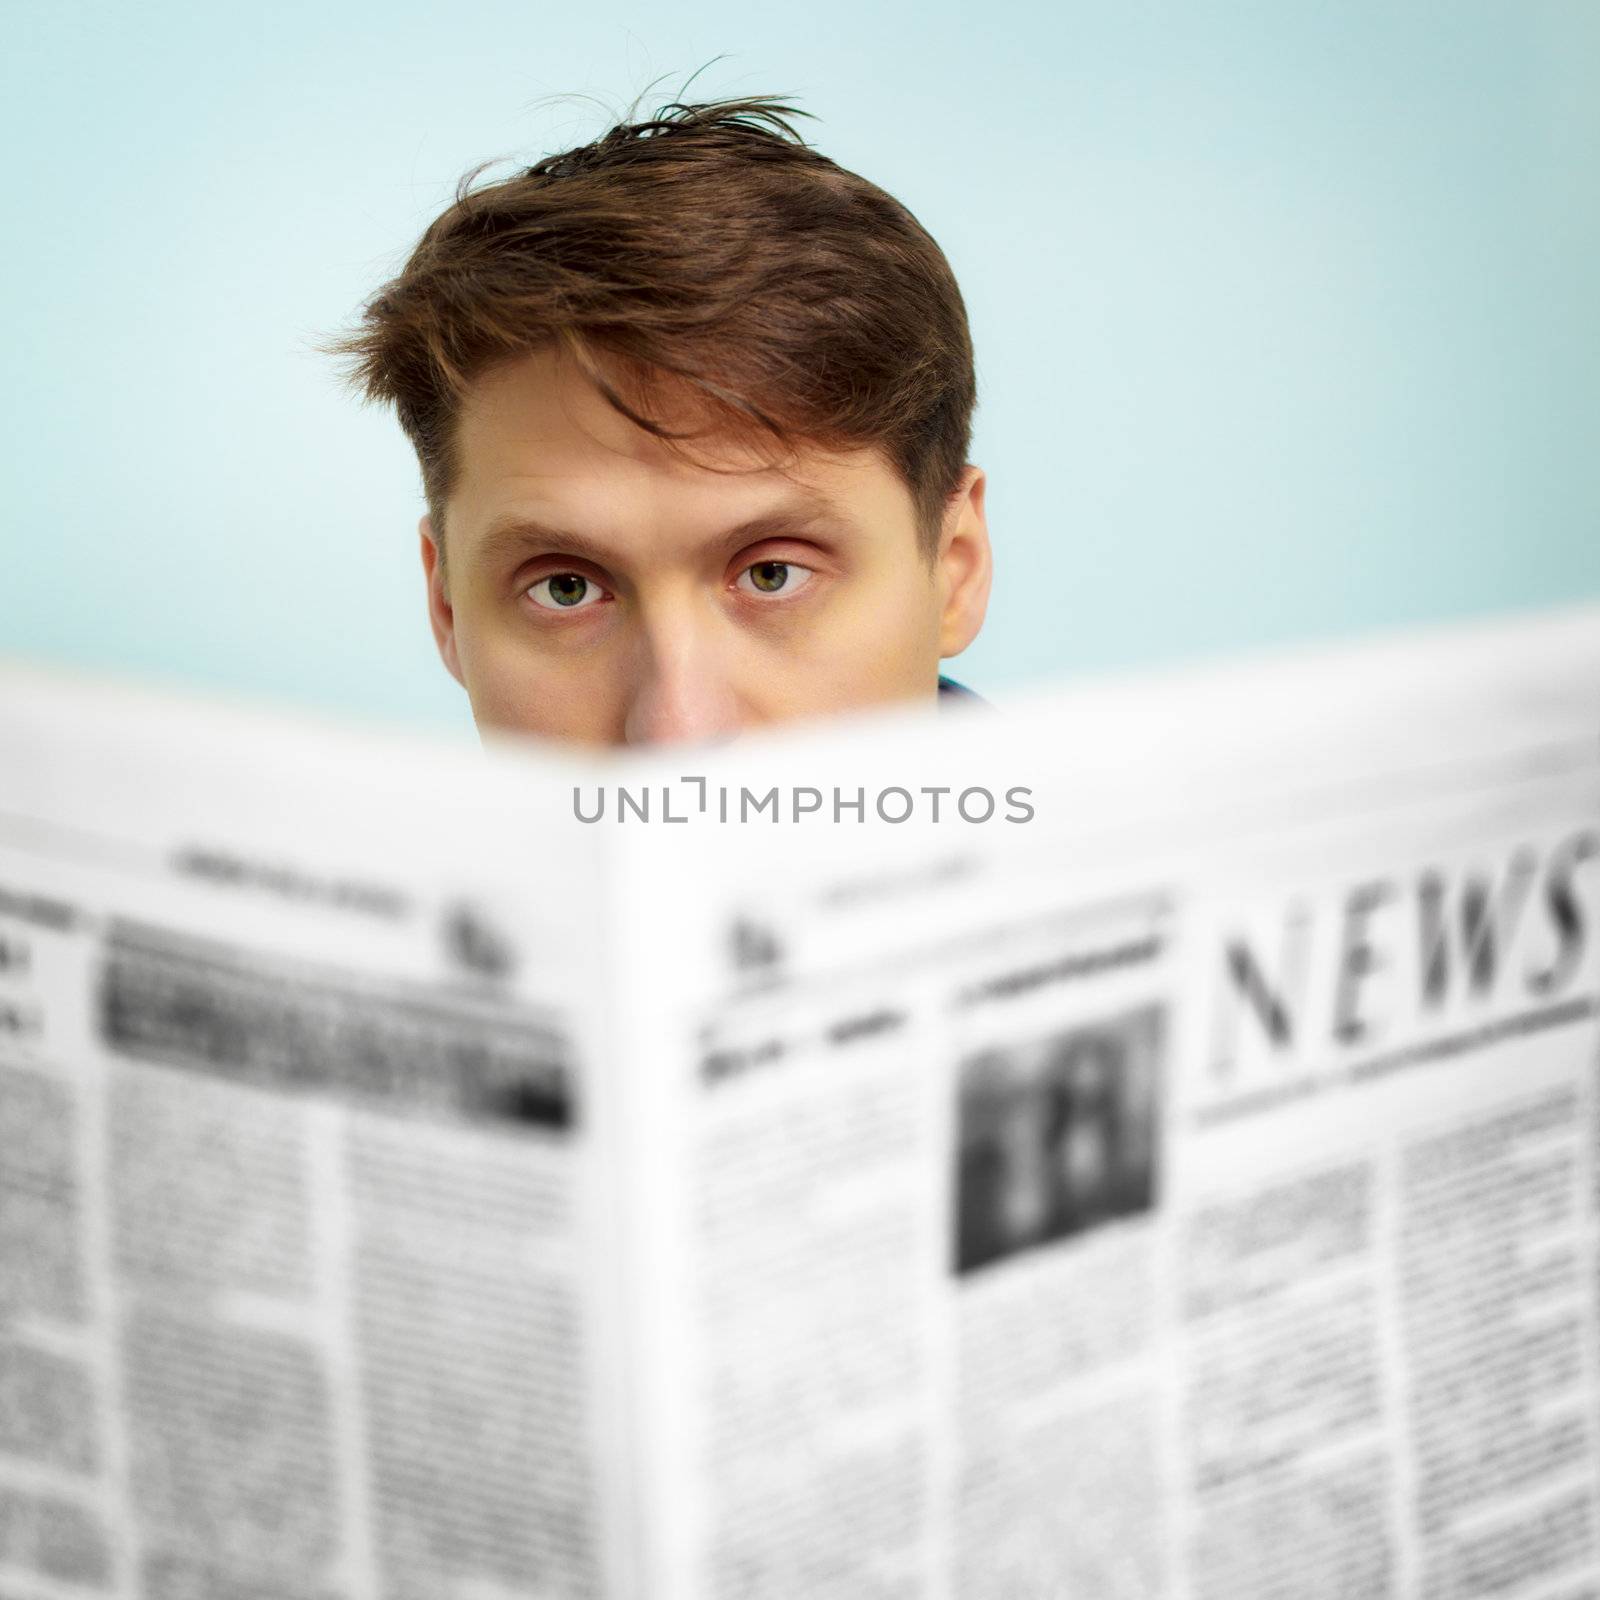 A man reads the news in the newspaper